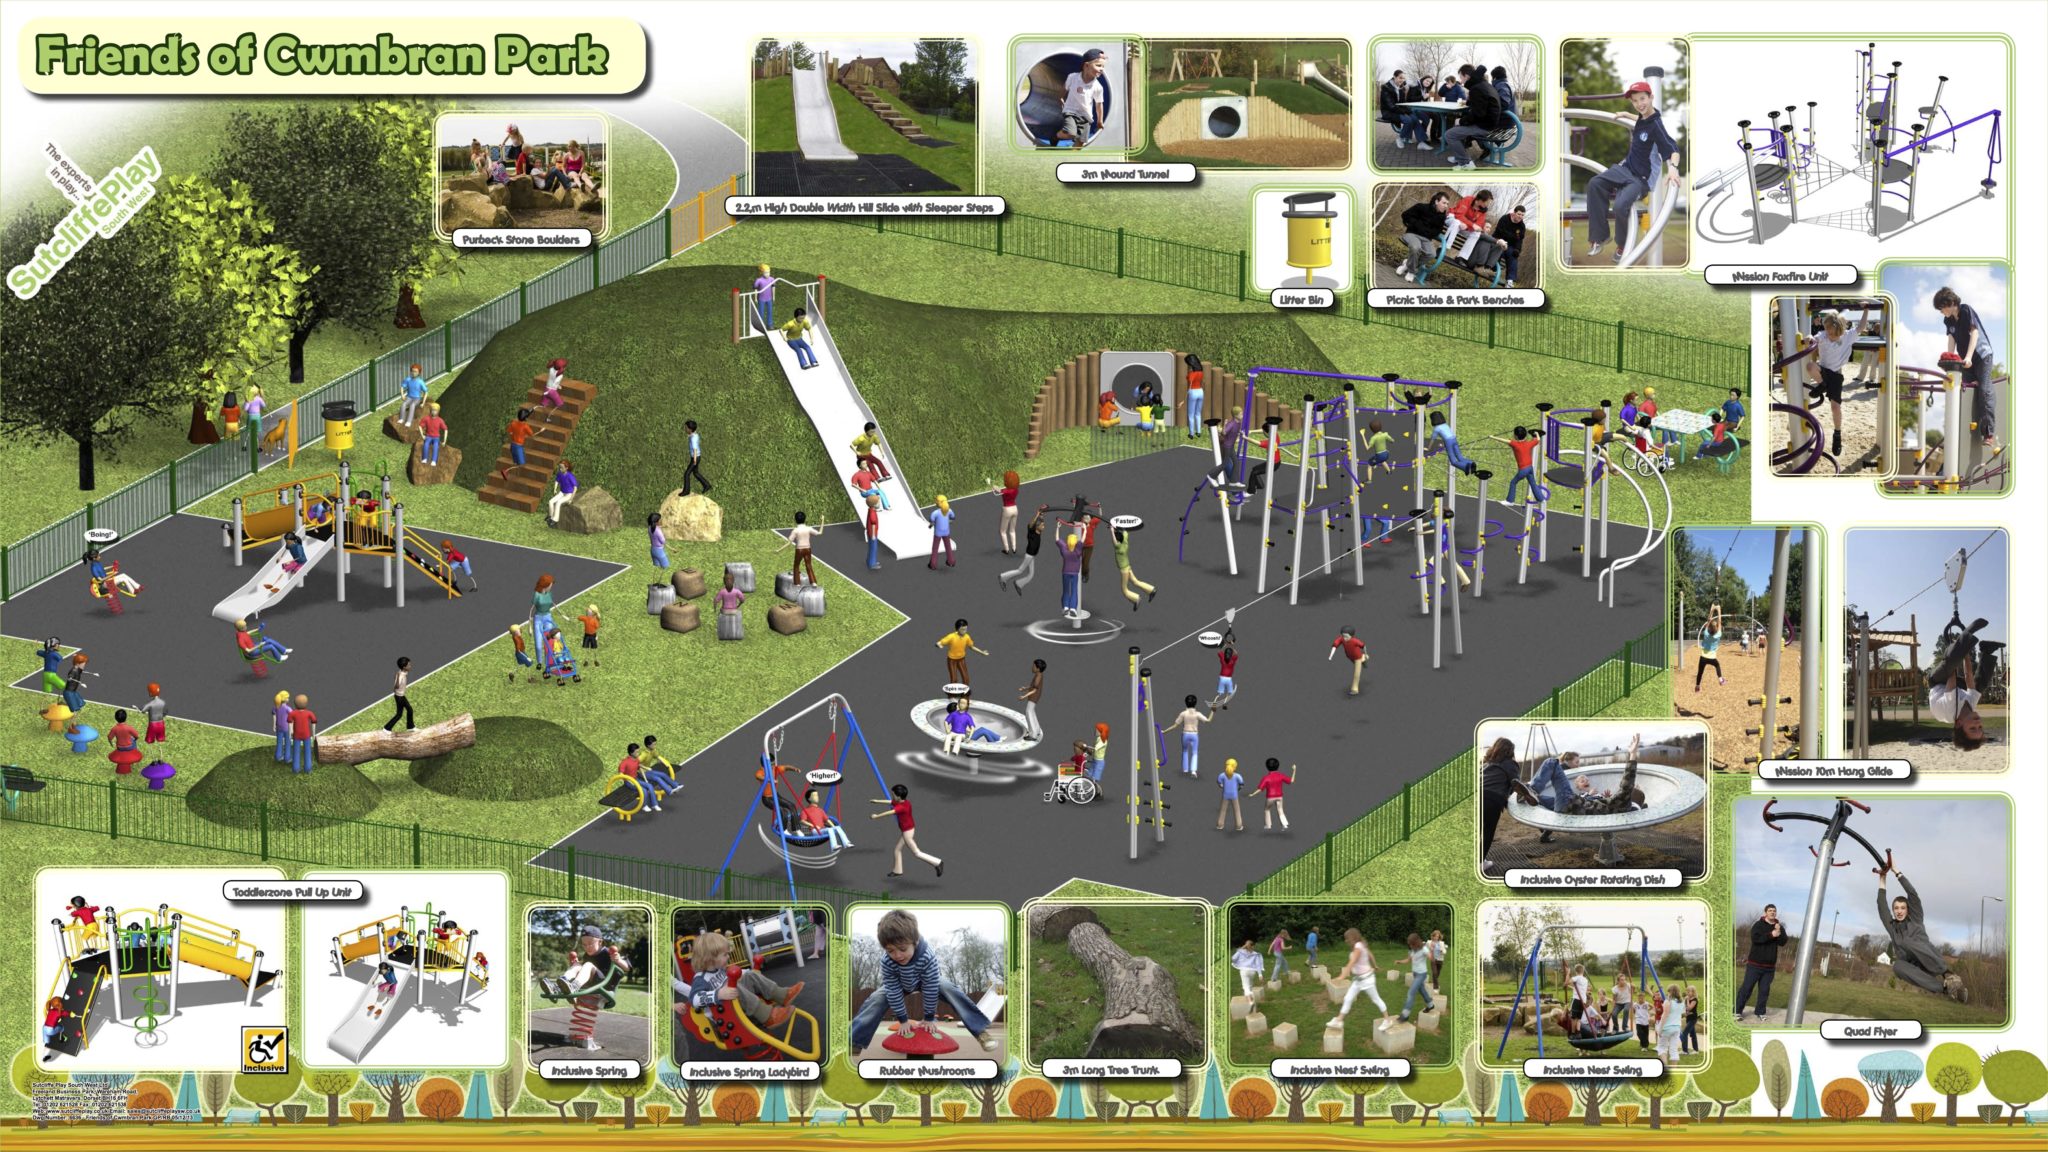 Artist's impression of what a new play area in Cwmbran Park could look like